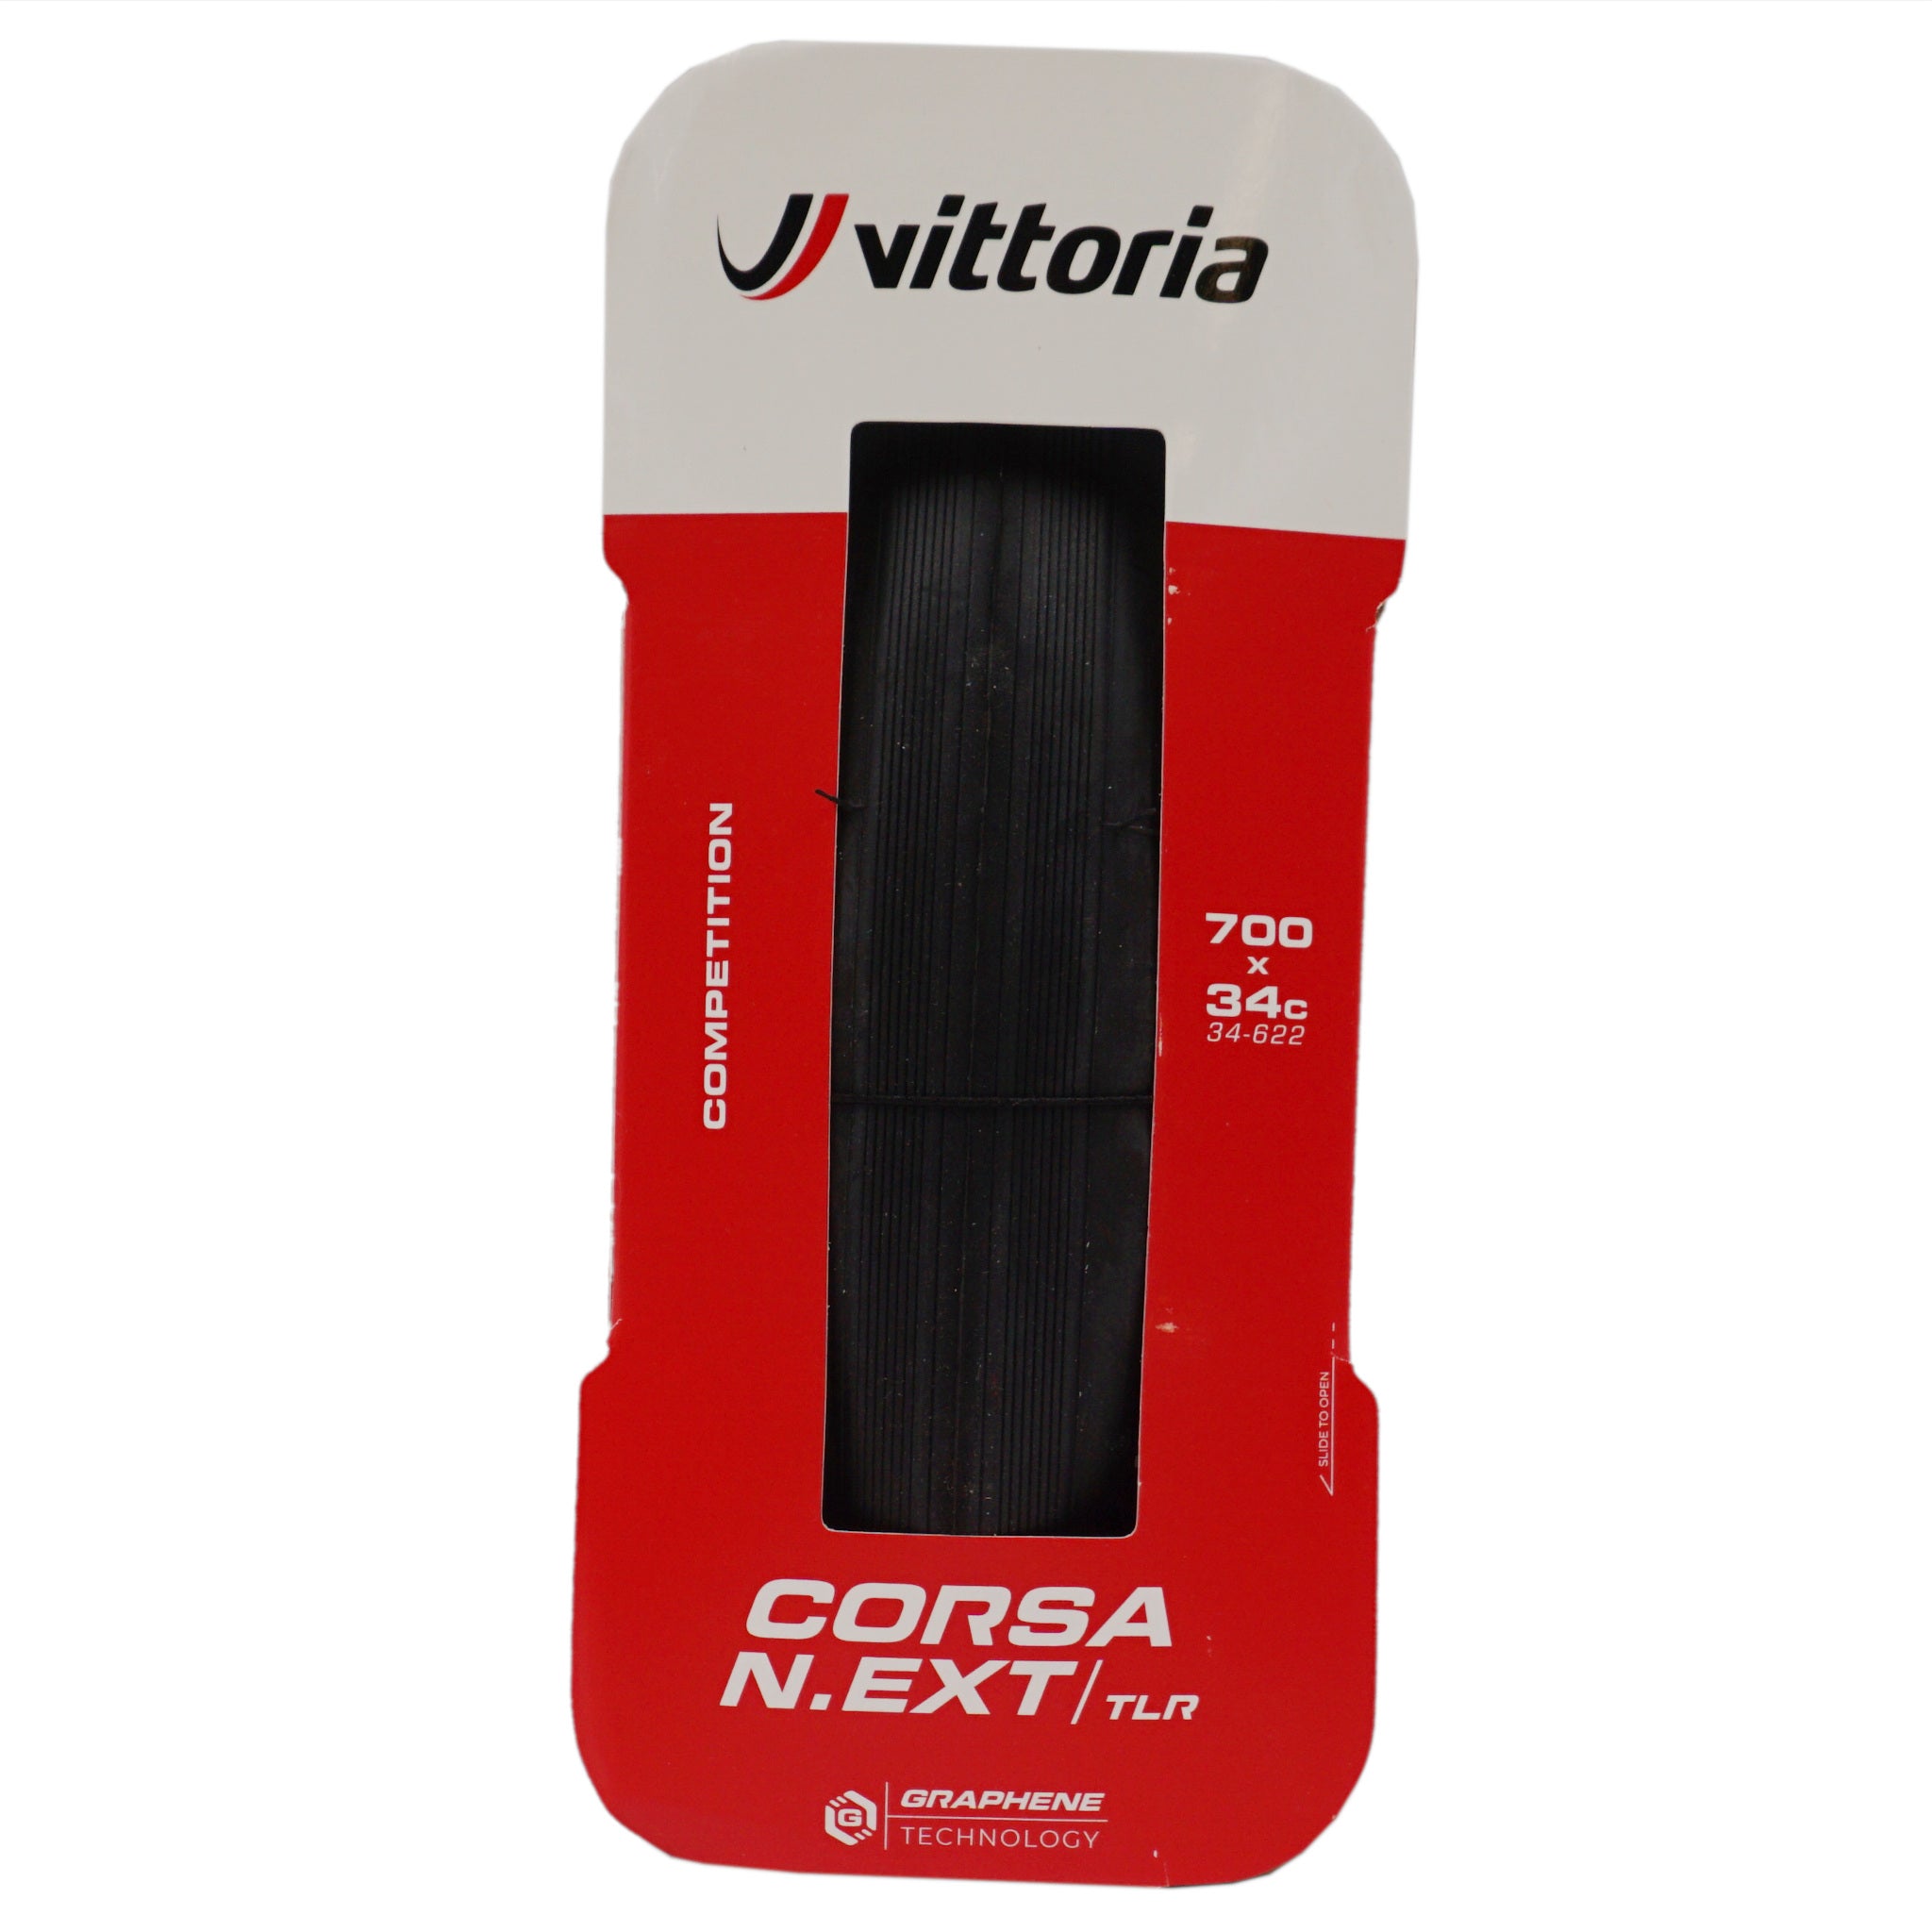 Vittoria Corsa N.EXT TLR 700c Tubeless Road Tire - The Bikesmiths